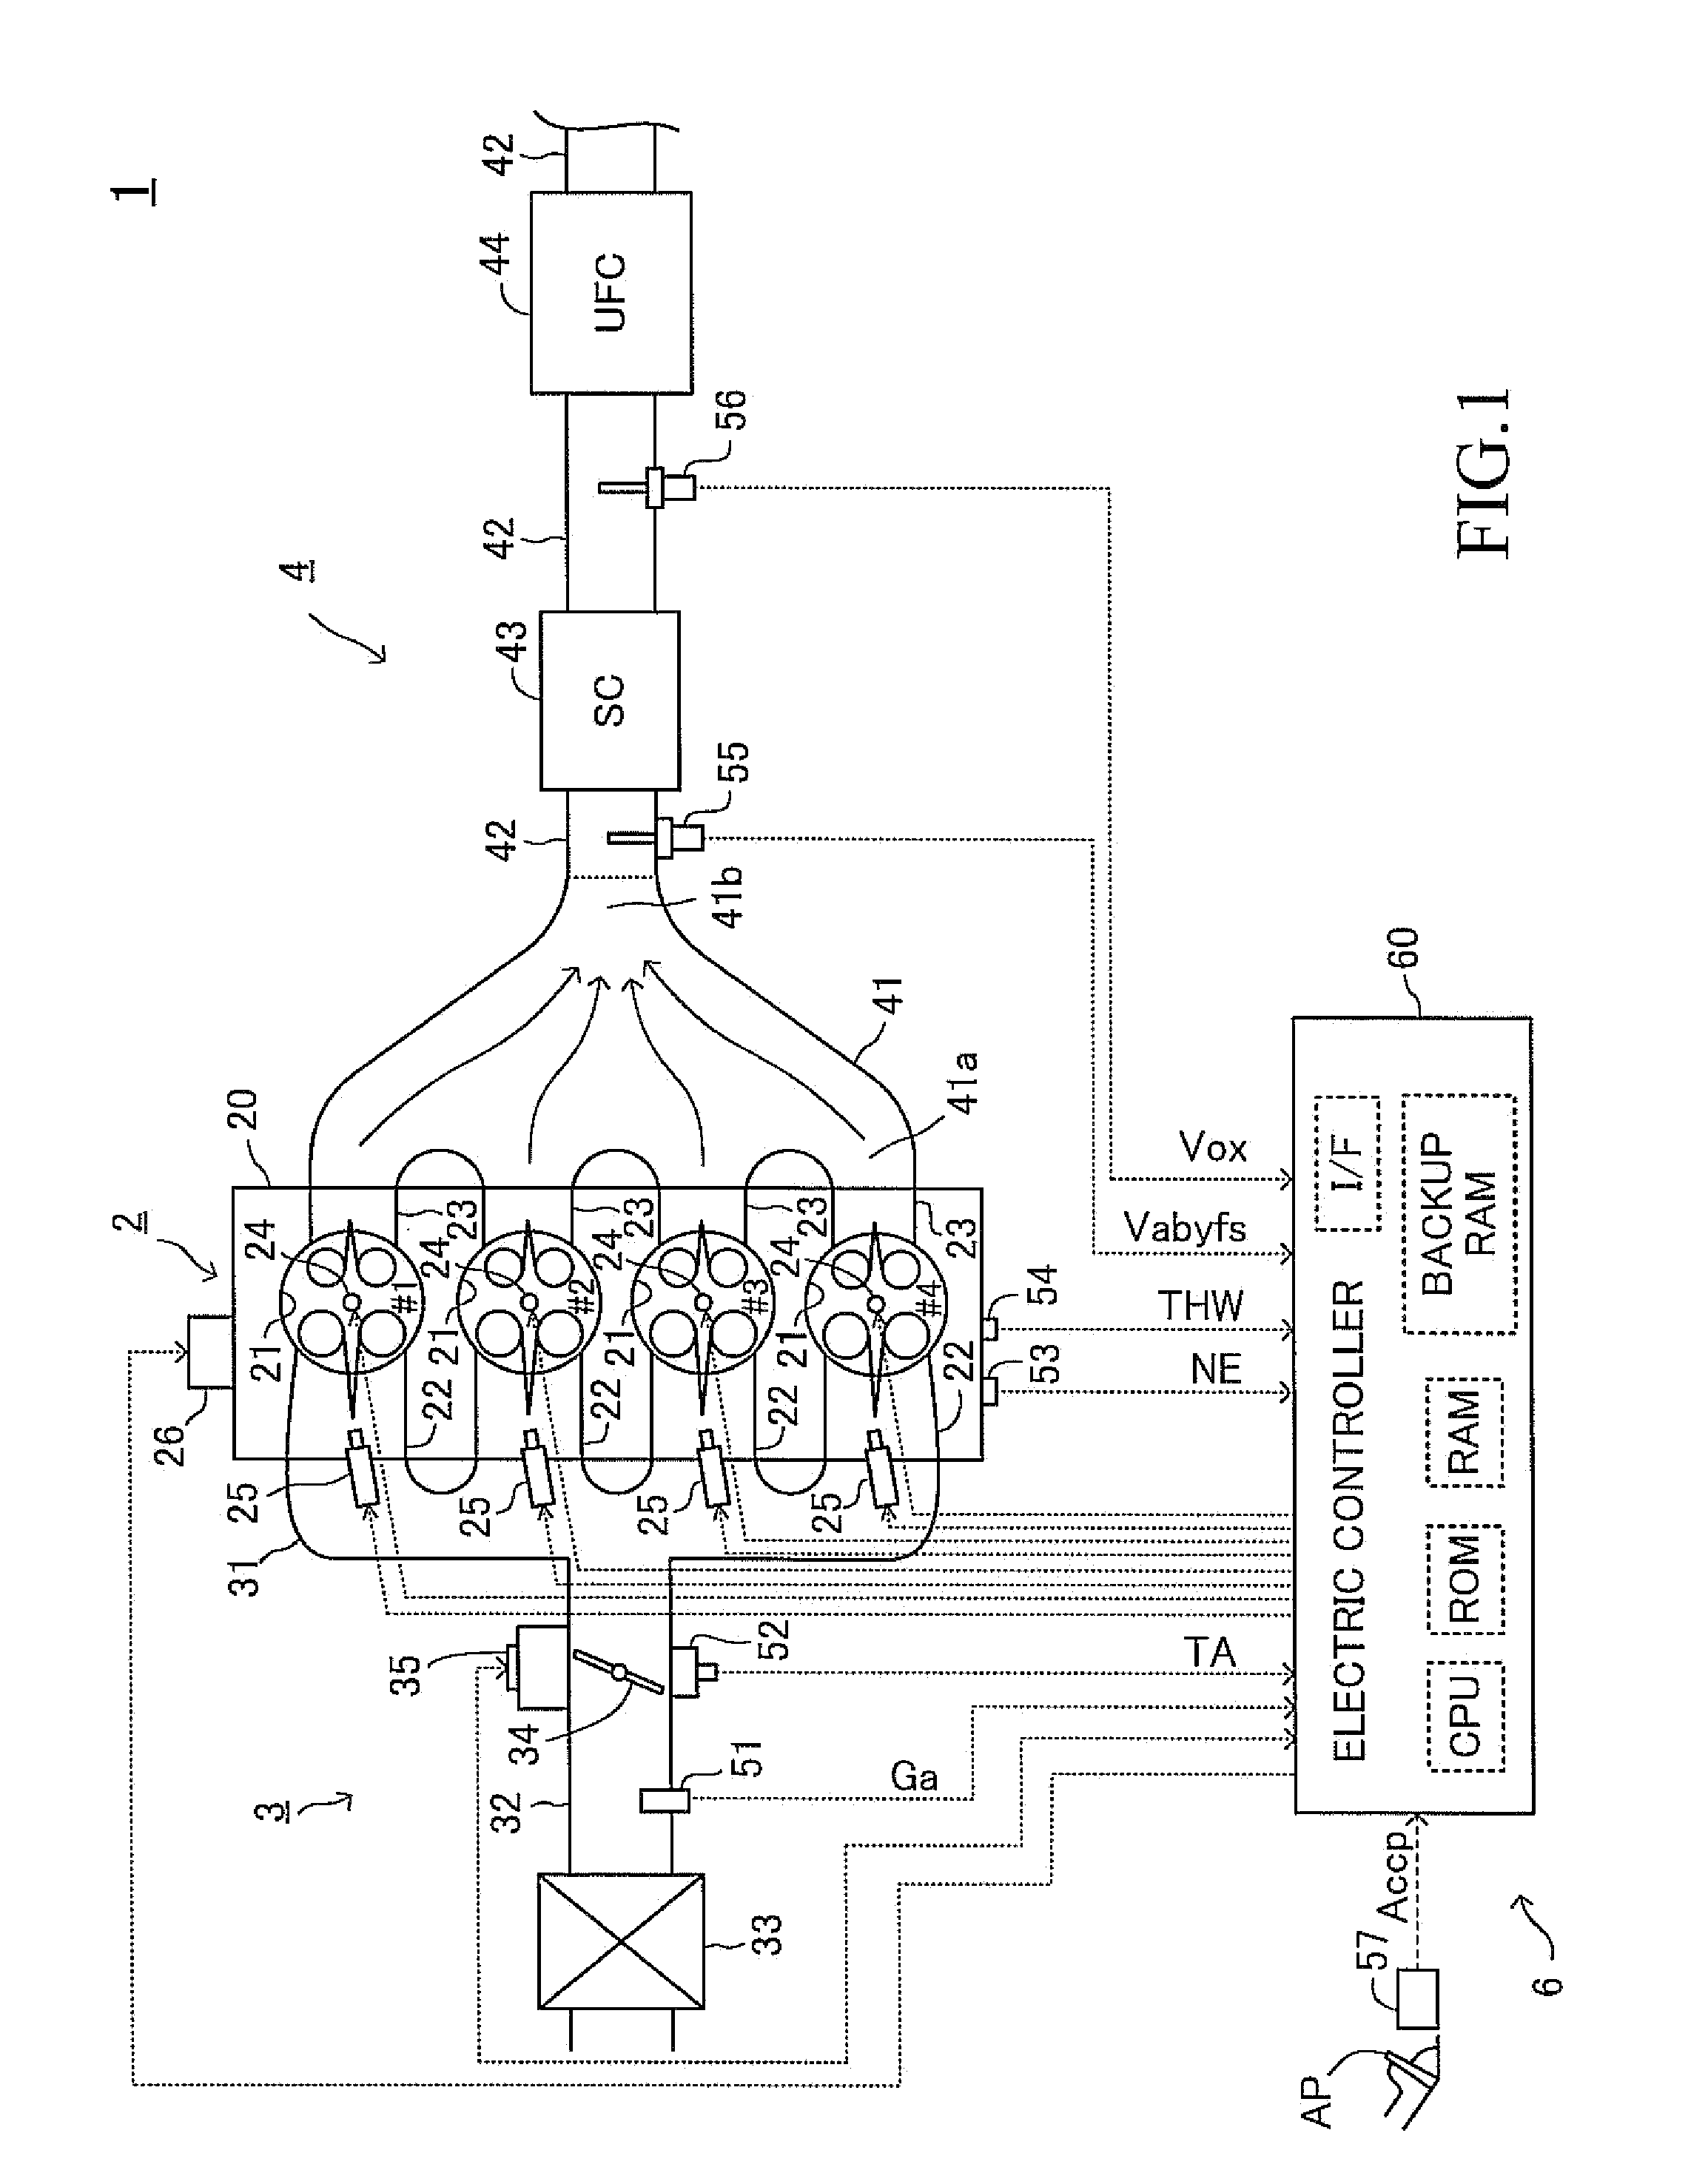 Internal combustion engine system controller